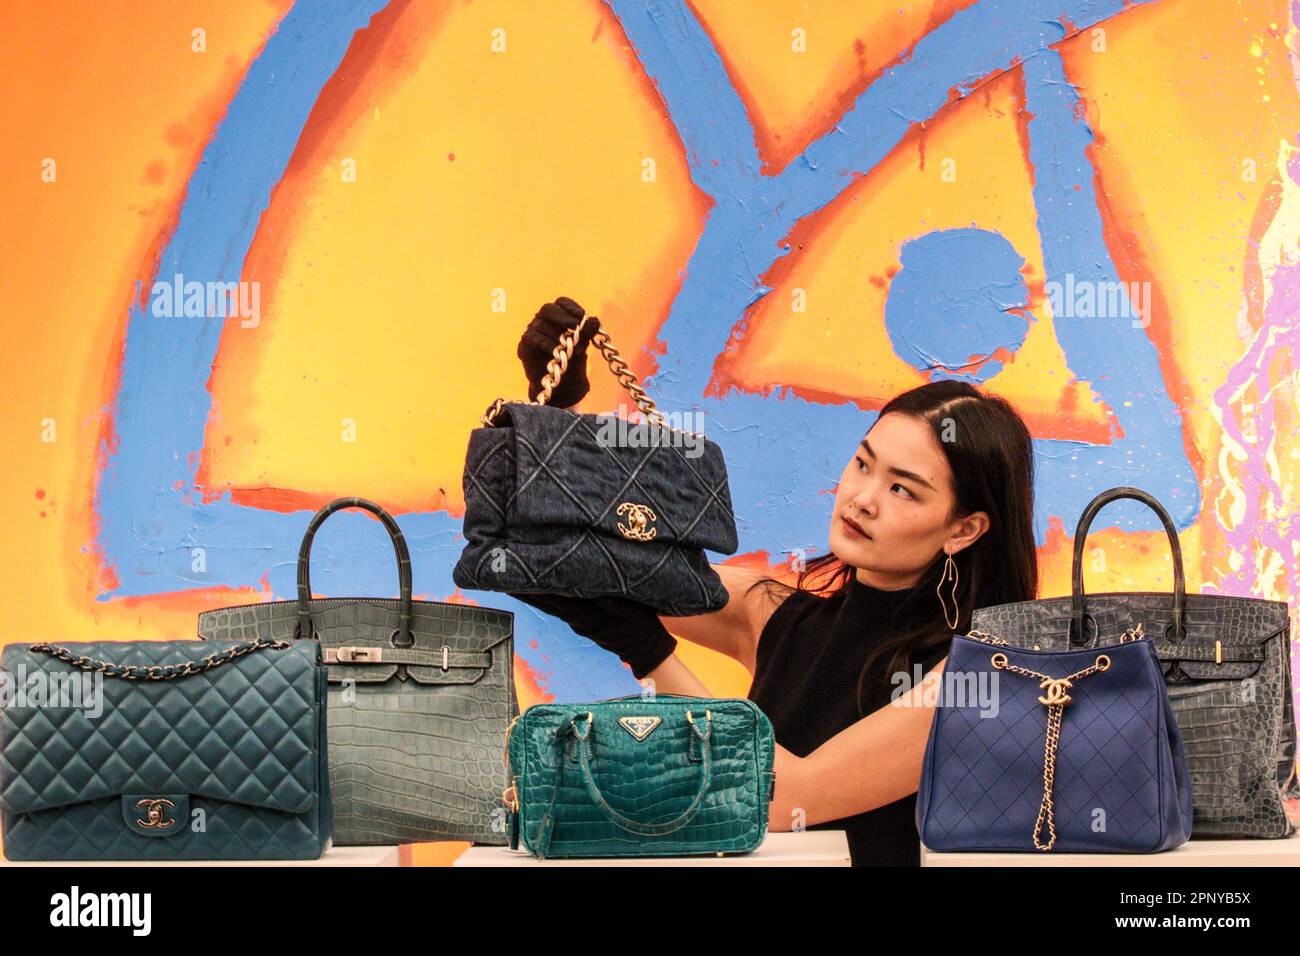 135 Distressed Hermes Birkin Bag Stock Photos, High-Res Pictures